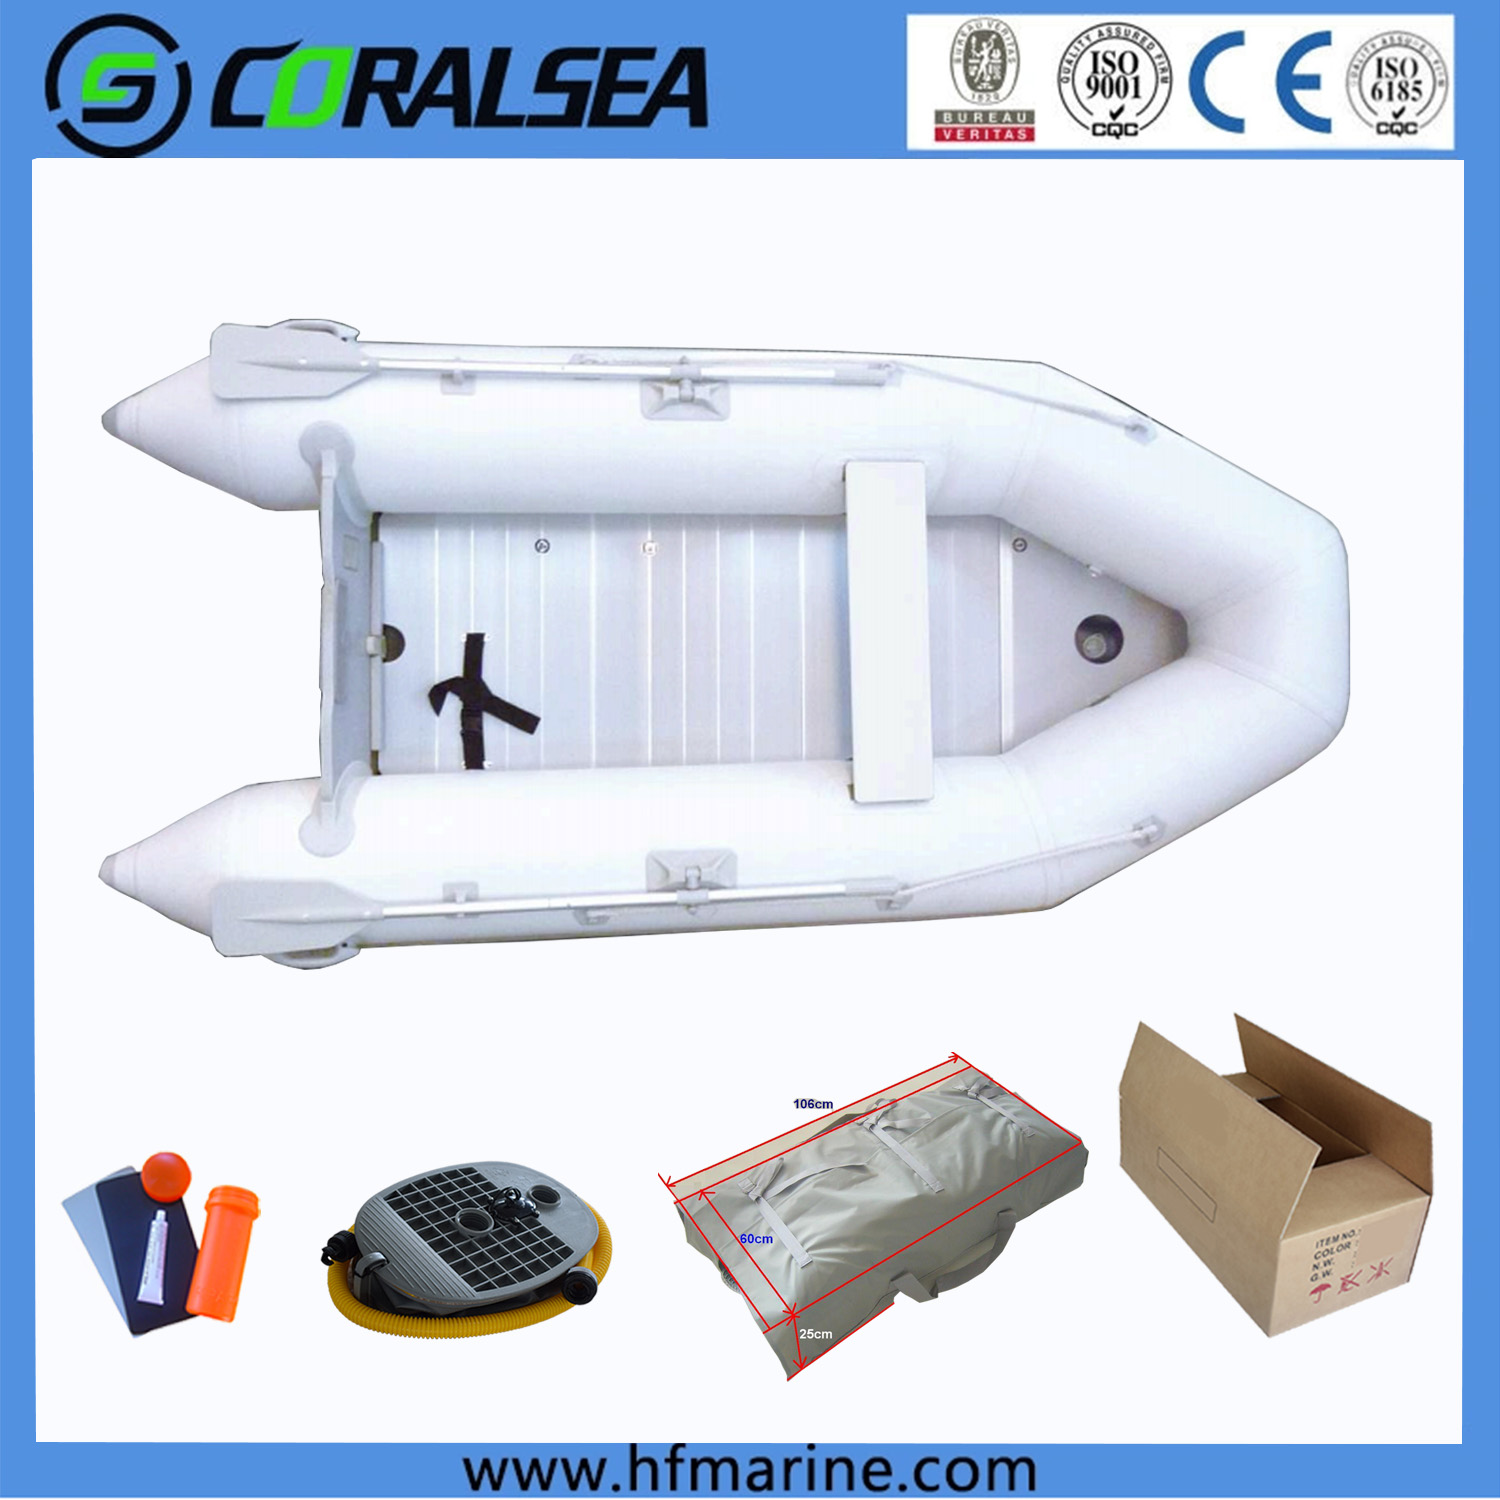 HSM – Economical and versatile foldable inflatable boat